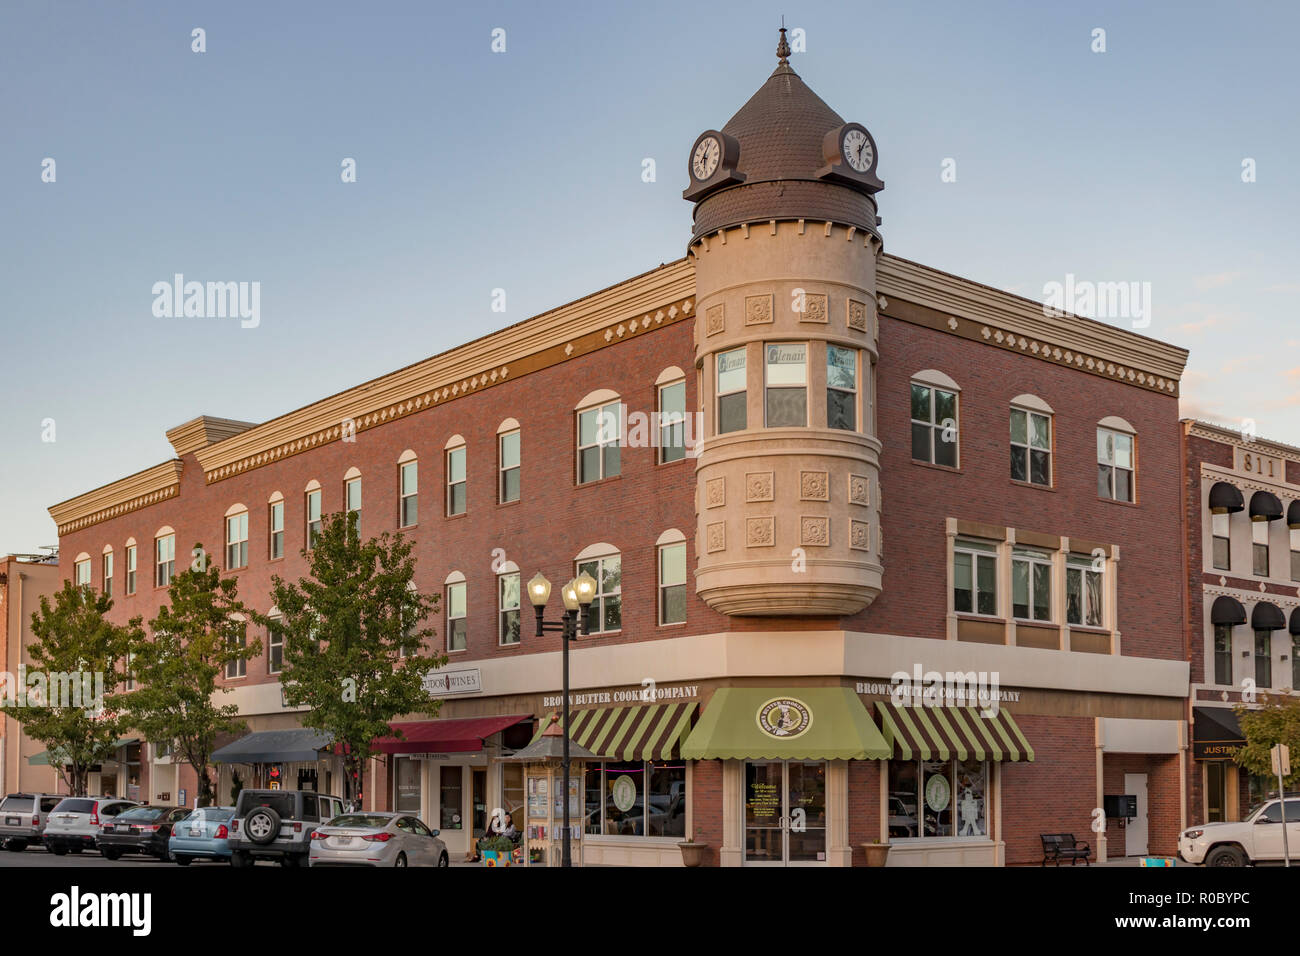 Paso Robles, California, USA - October 11, 2018: The iconic Acorn Building with a clocktown at the corner of 12th and Park Street in Downtown Paso Rob Stock Photo